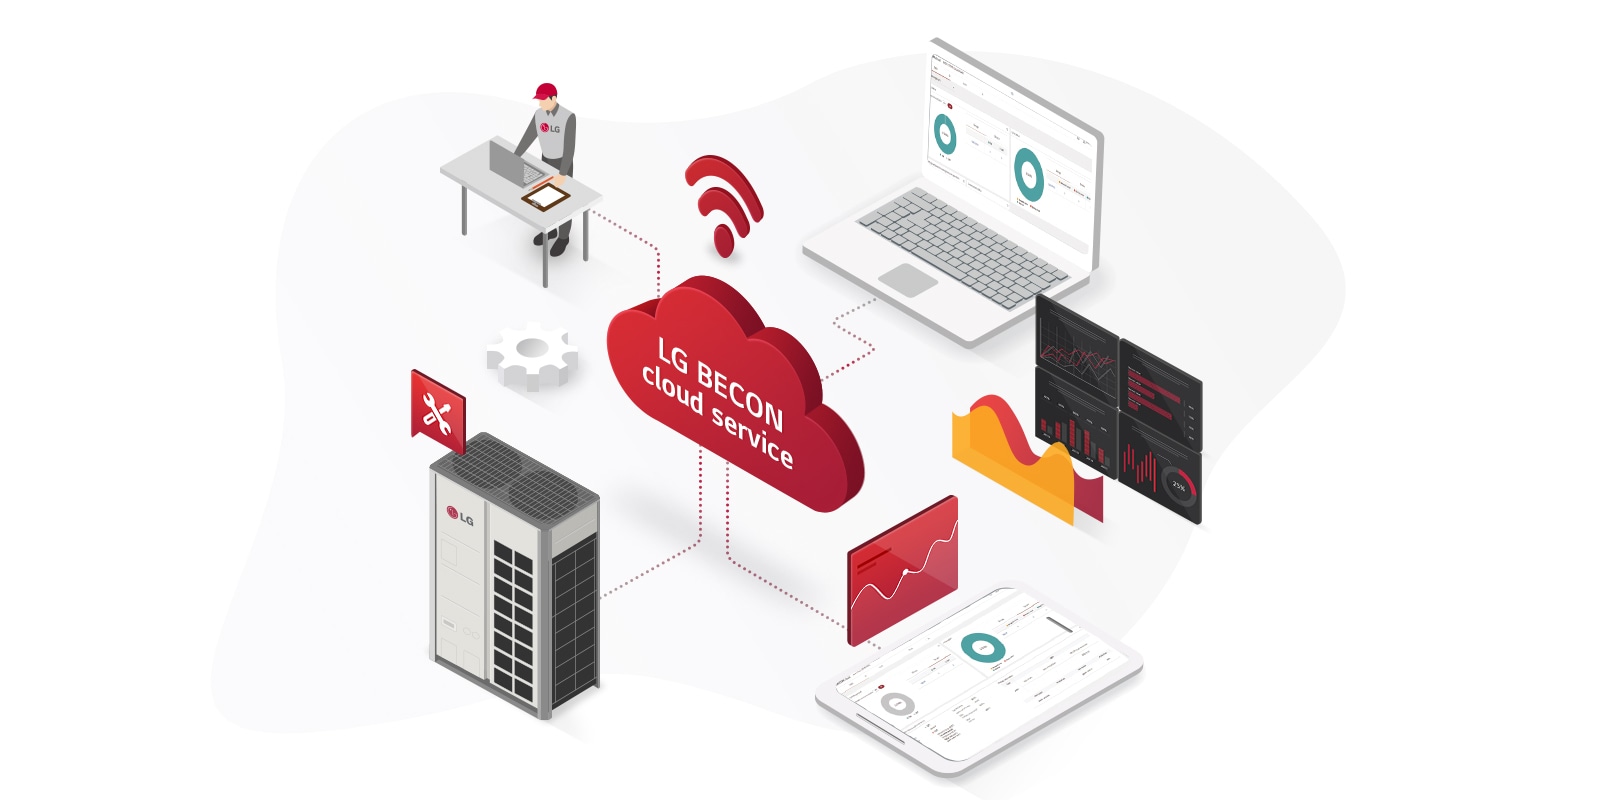 LG BECON cloud, top with Wi-Fi icon, extends from the center to the VRF system, monitoring service, and two smart devices with red dotted lines.